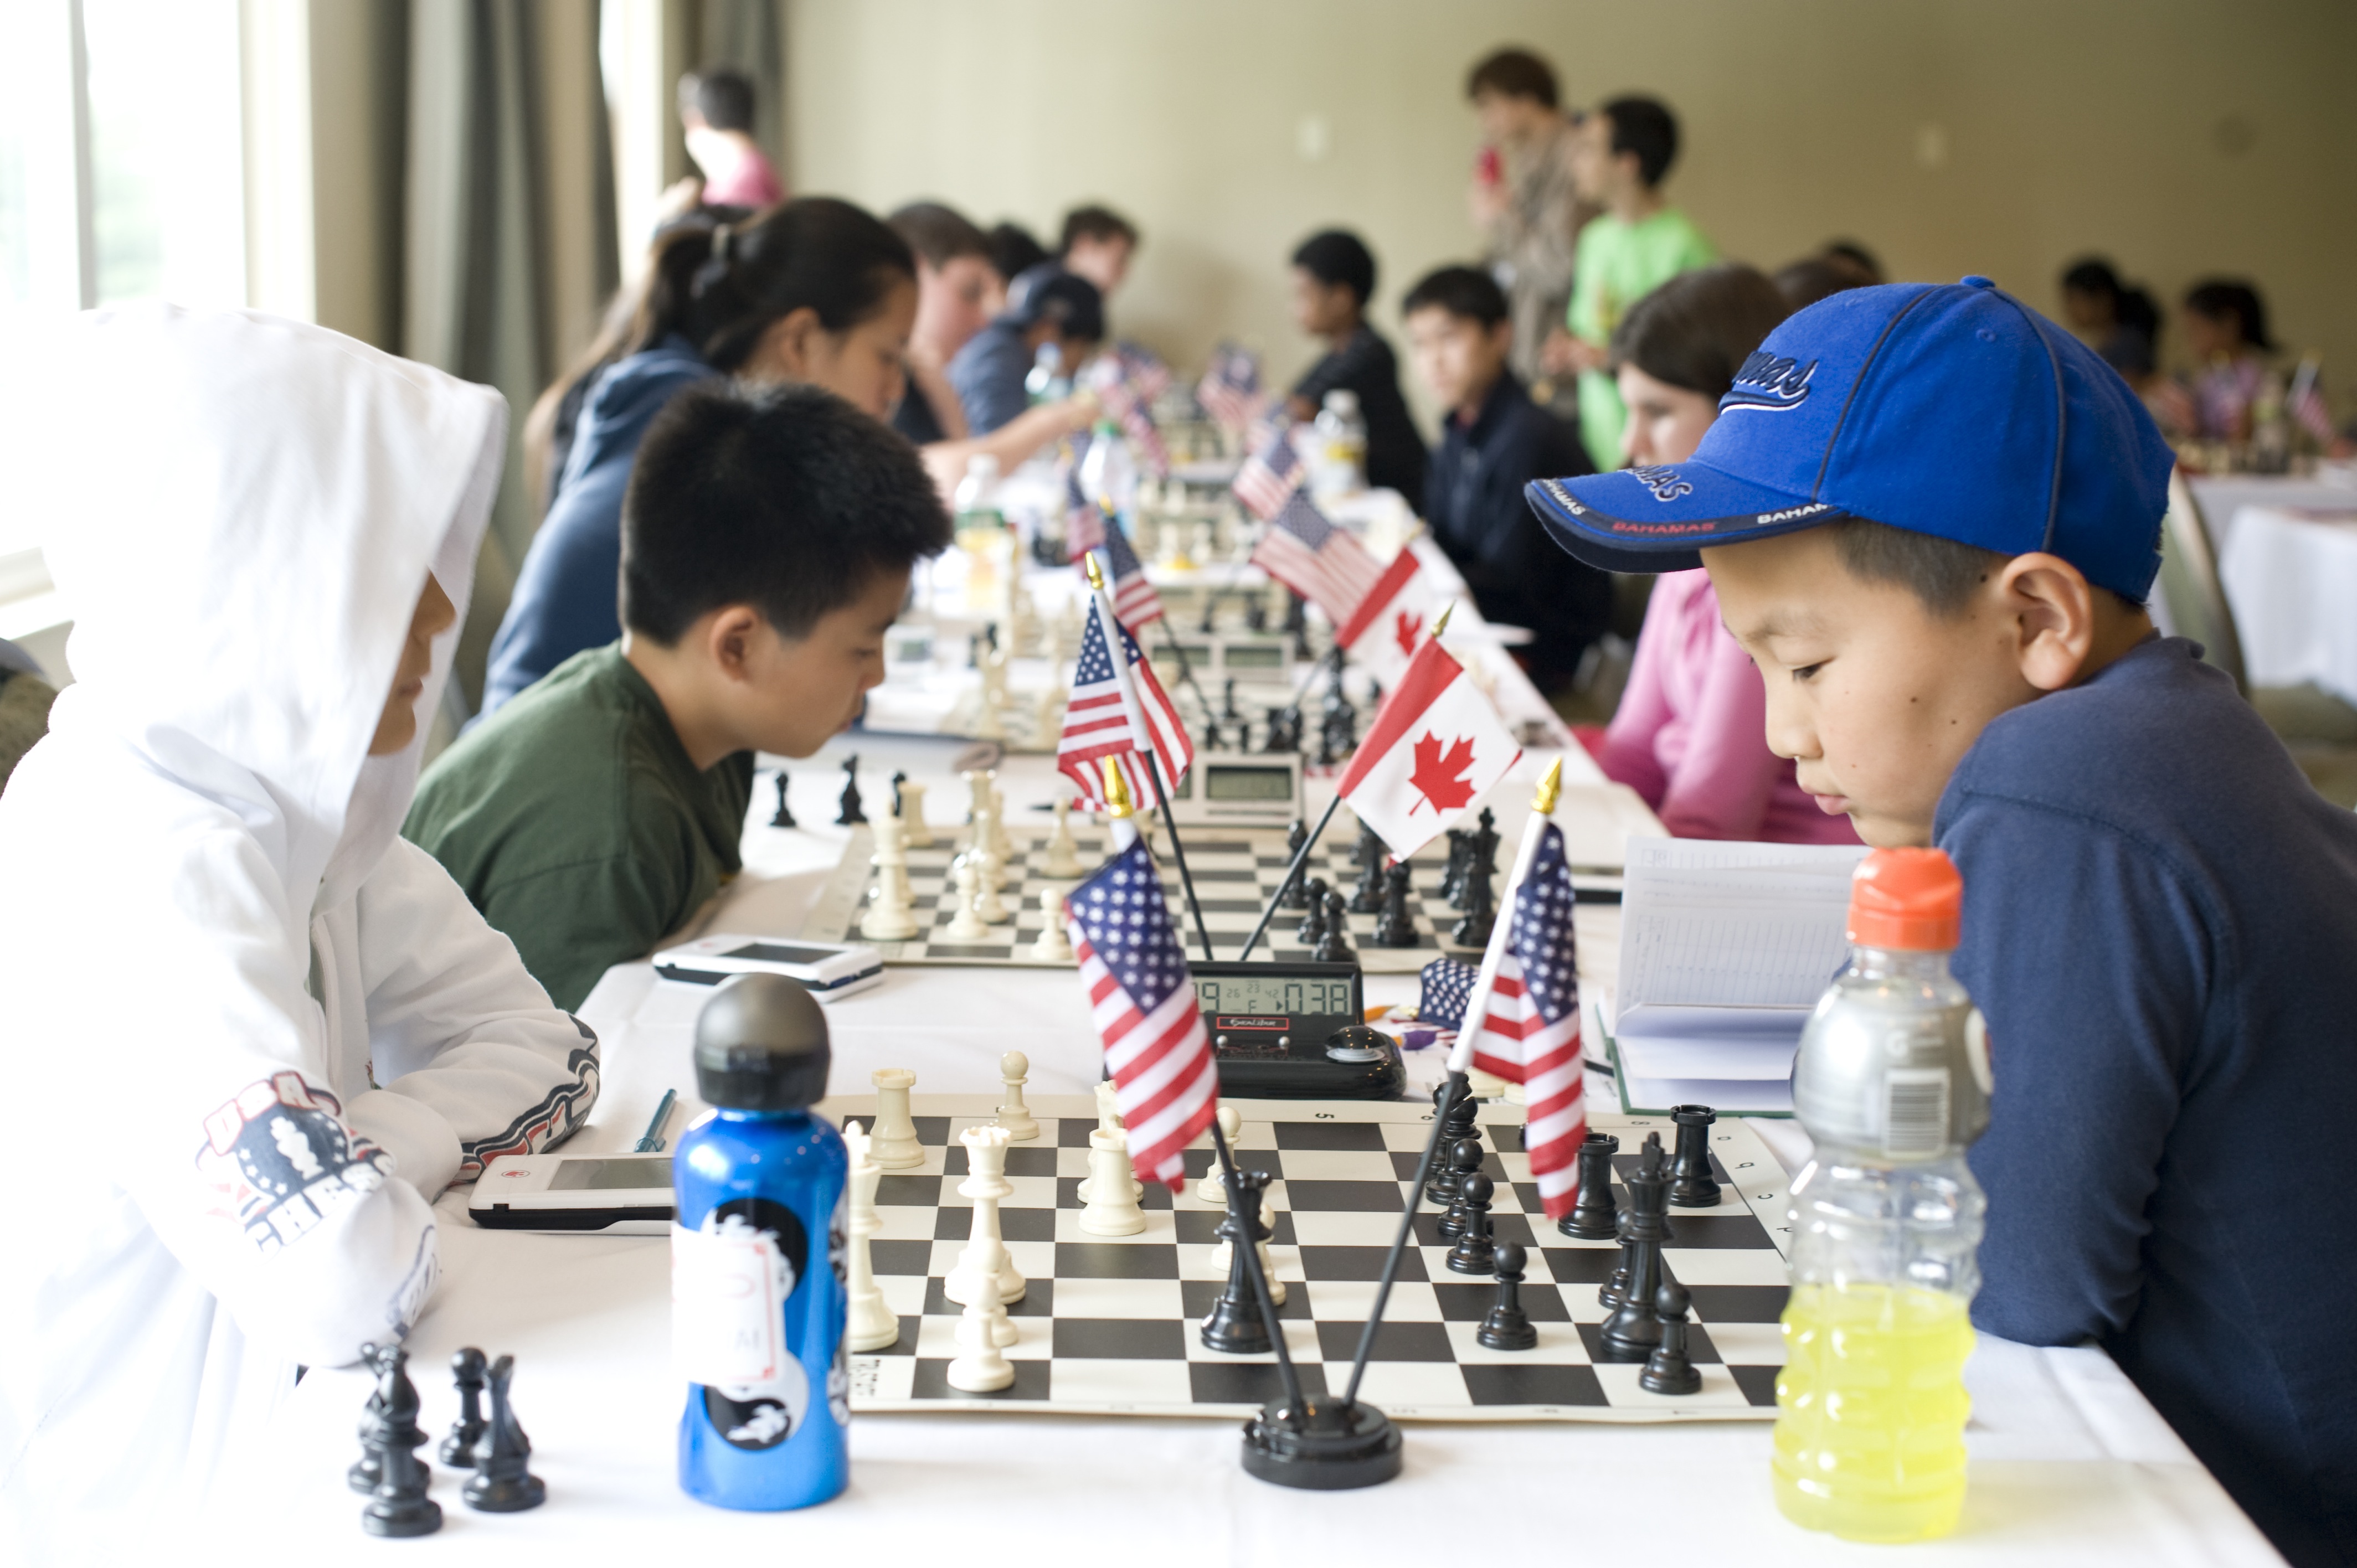 Chessplayers at the 2011 North American Youth Championship, Tarrytown, New York. Photo Credit Dora Leticia ©